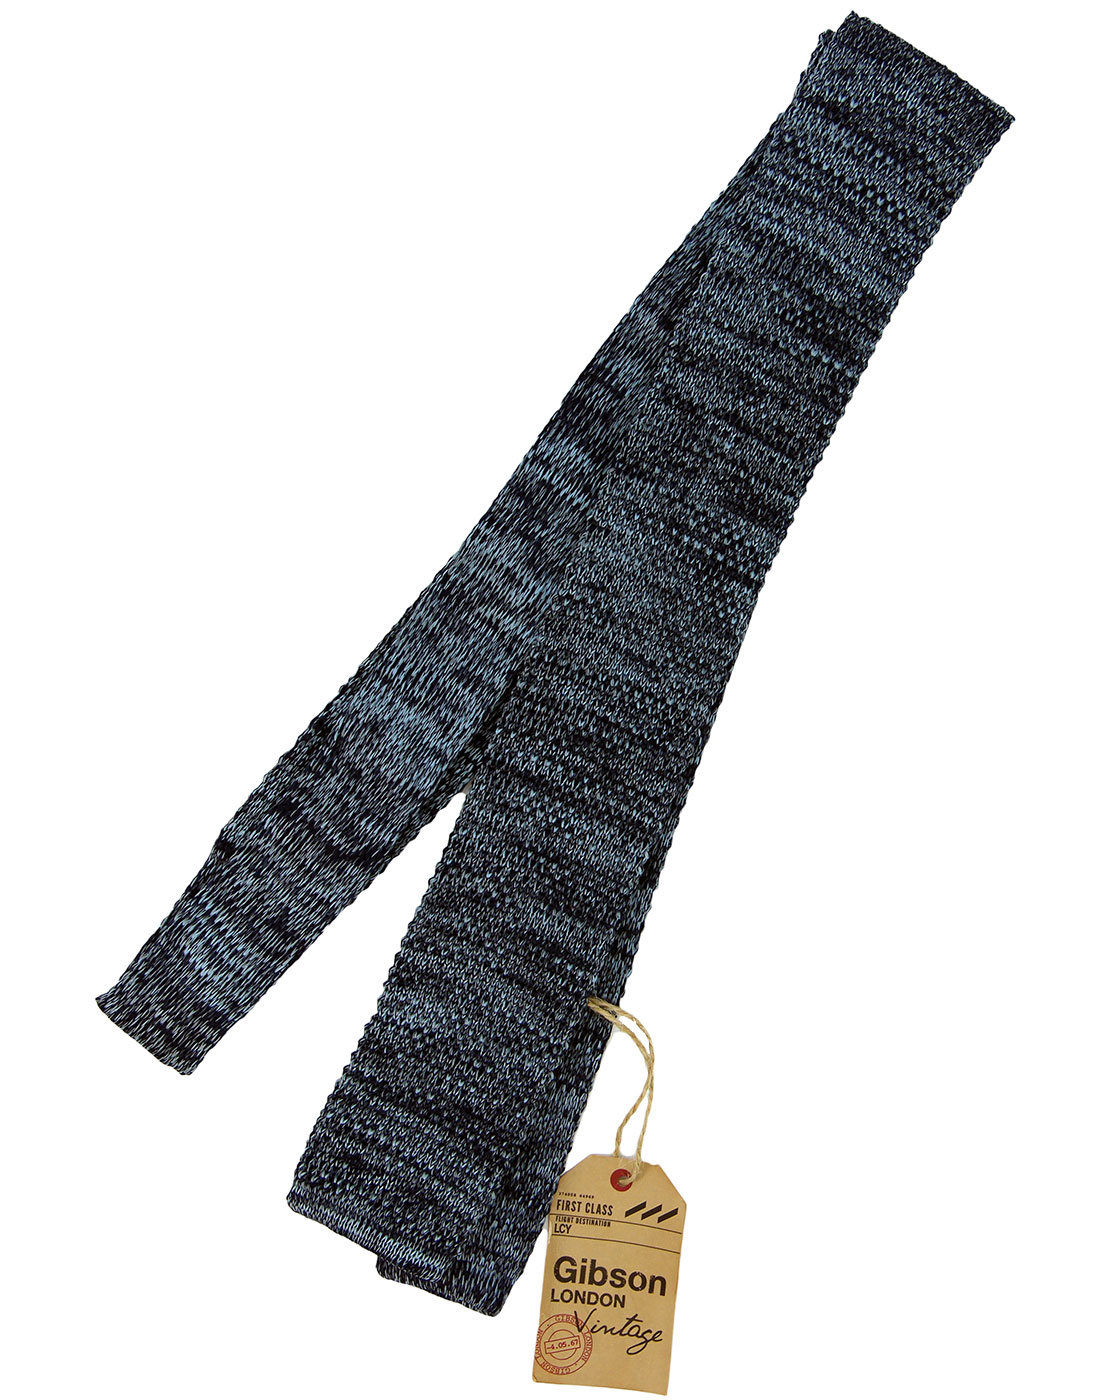 GIBSON LONDON Retro 1960s Mod Knitted Square End Tie in Blue